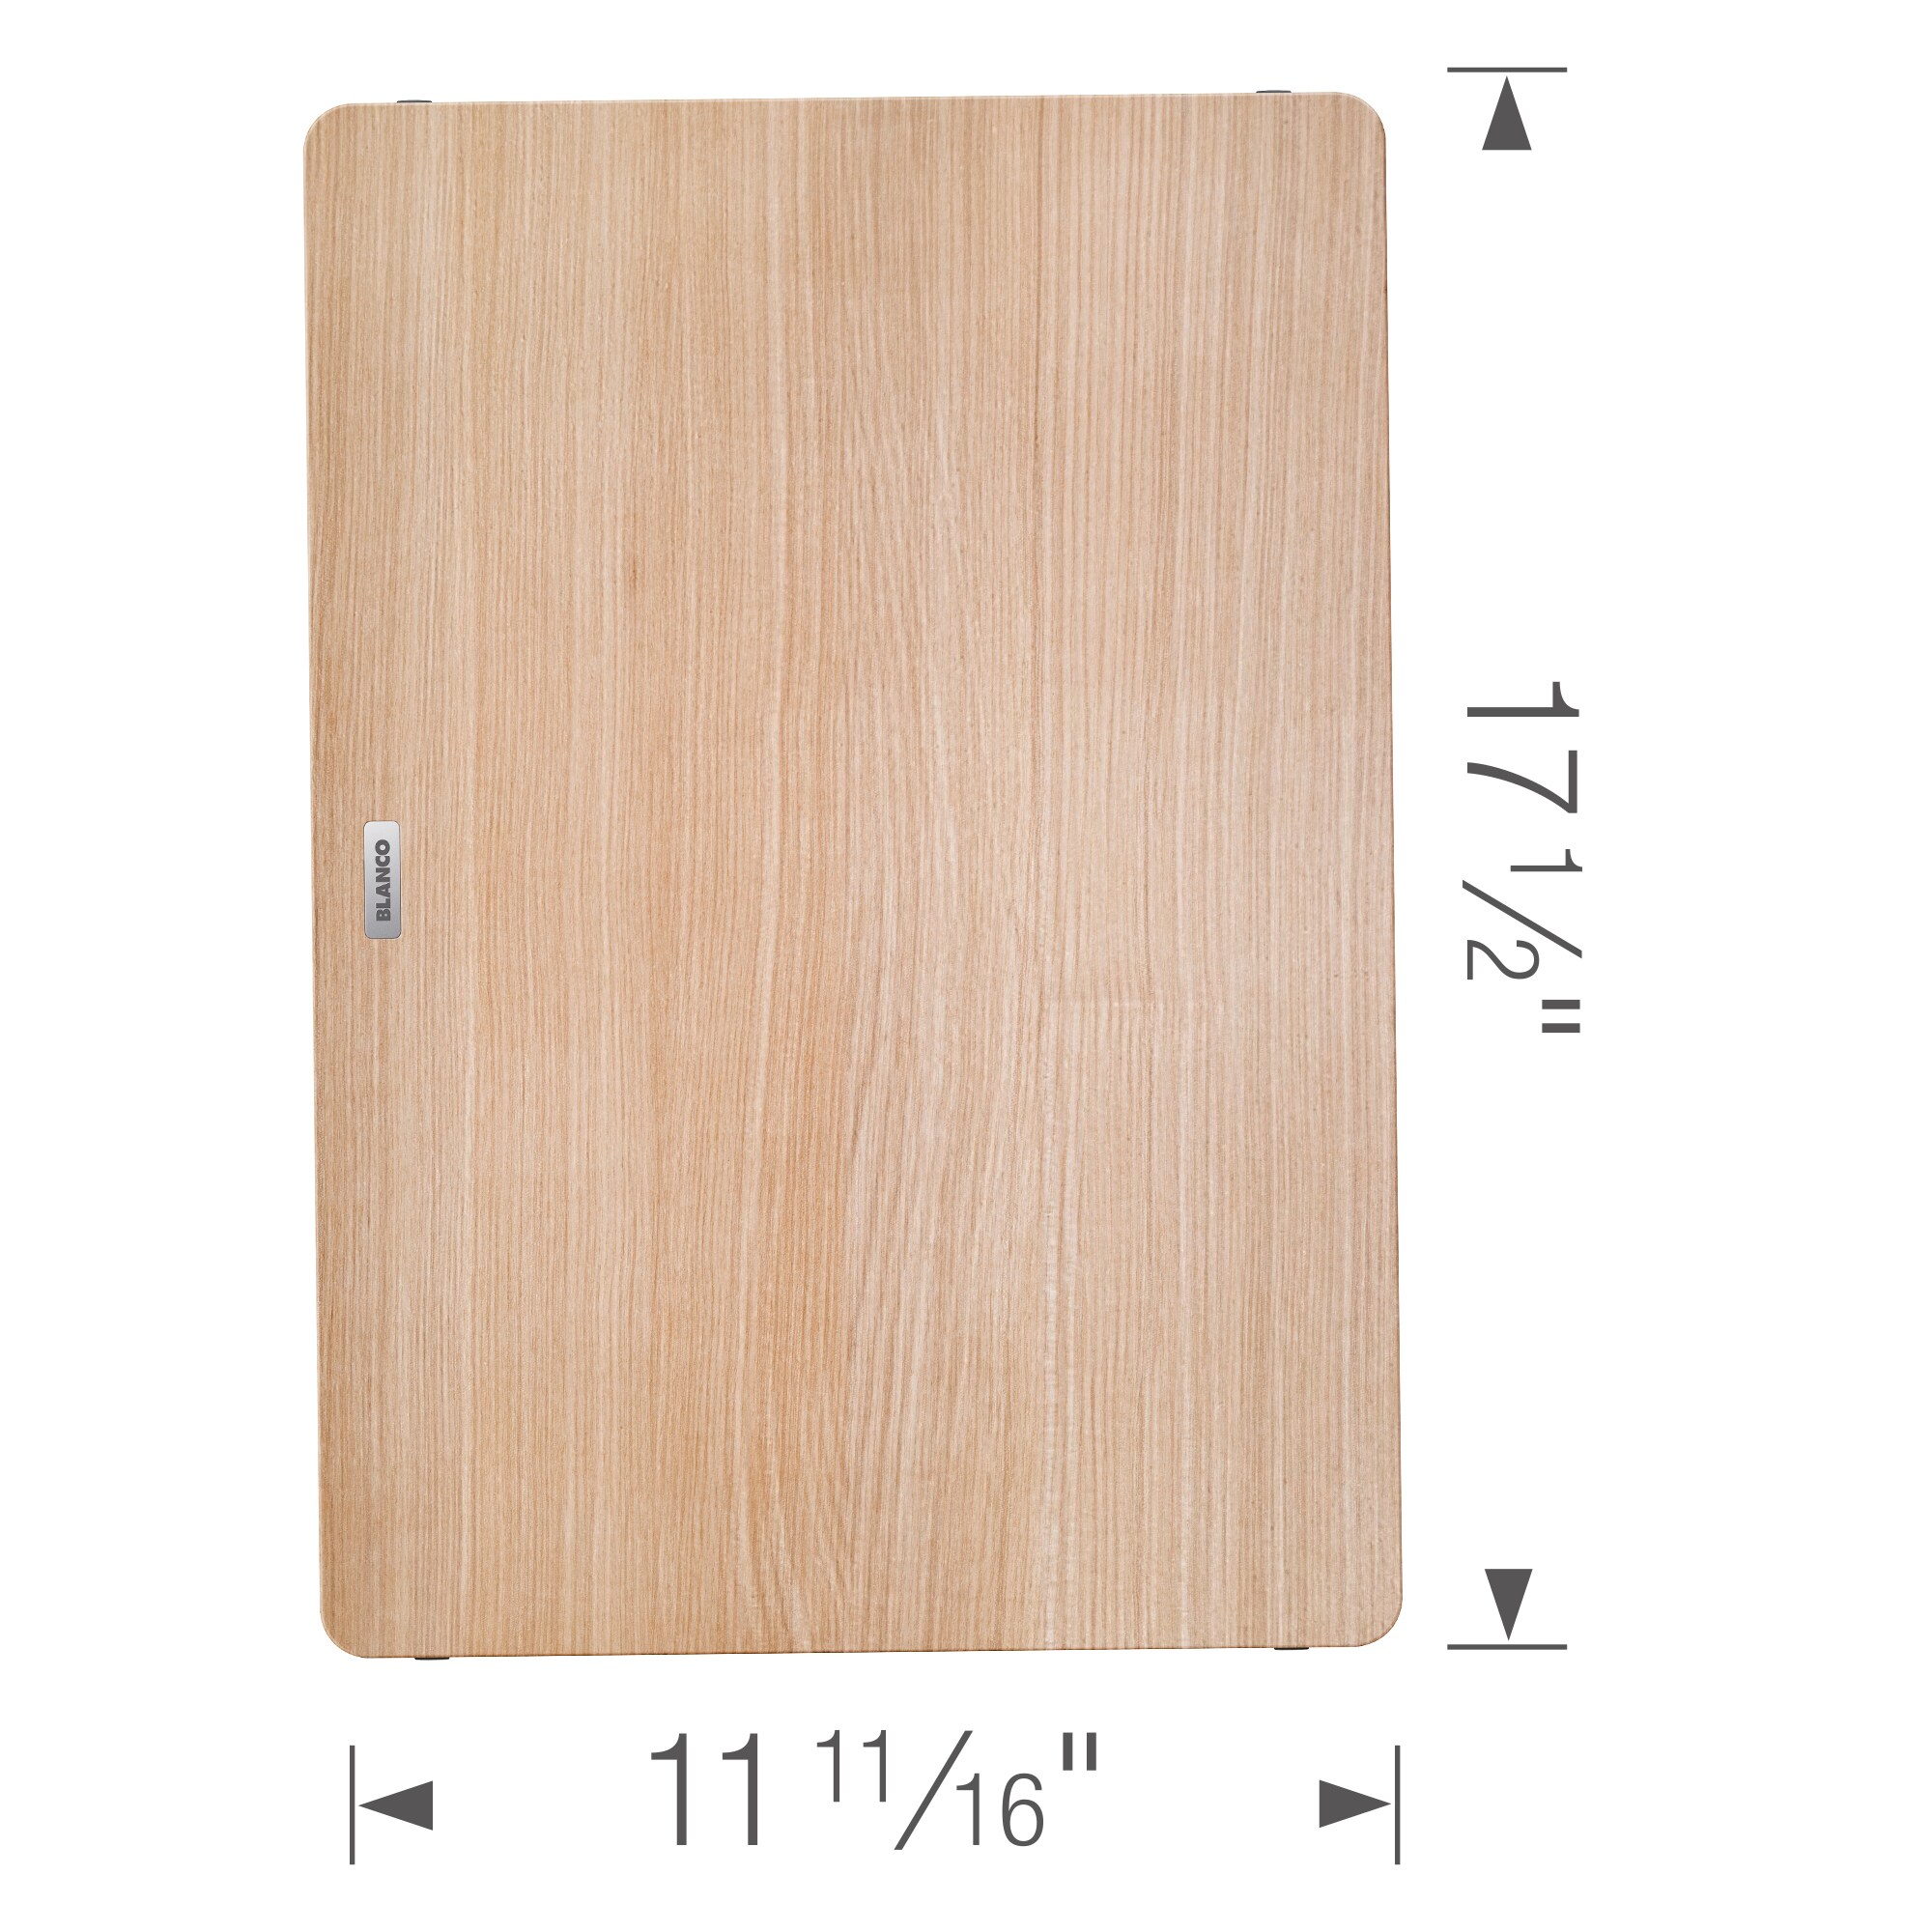 Design Your Own Rectangular Glass Cutting Board - Large - 15.25 x 11.25